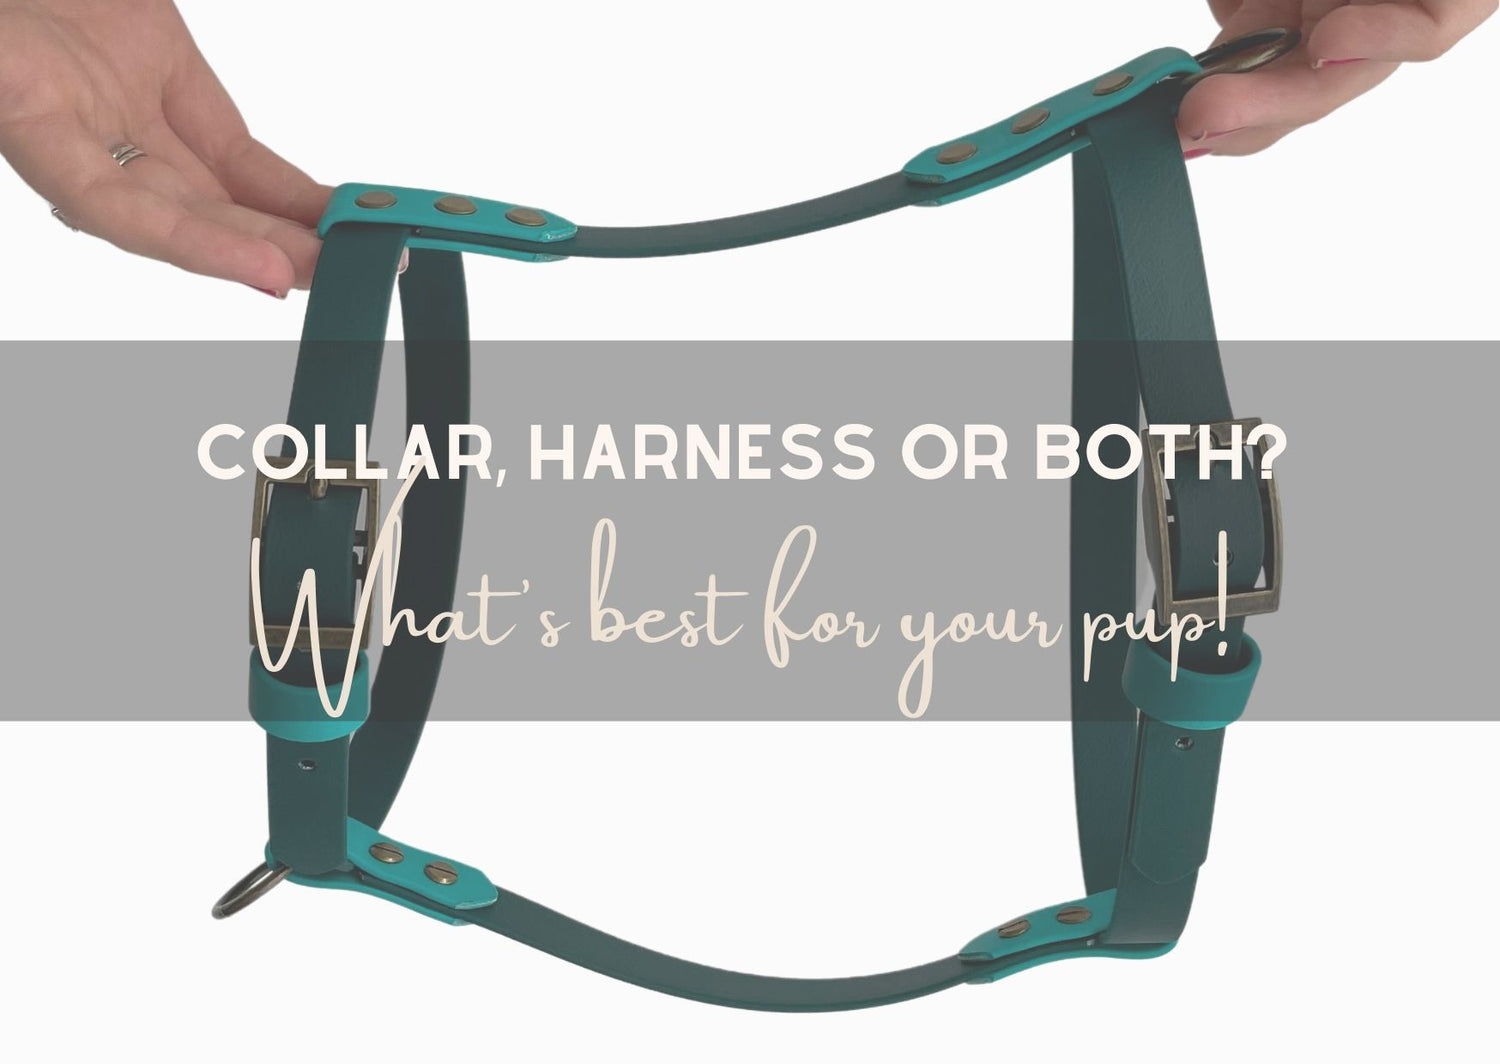 Collar, Harness or both? What's best for you and your pup!